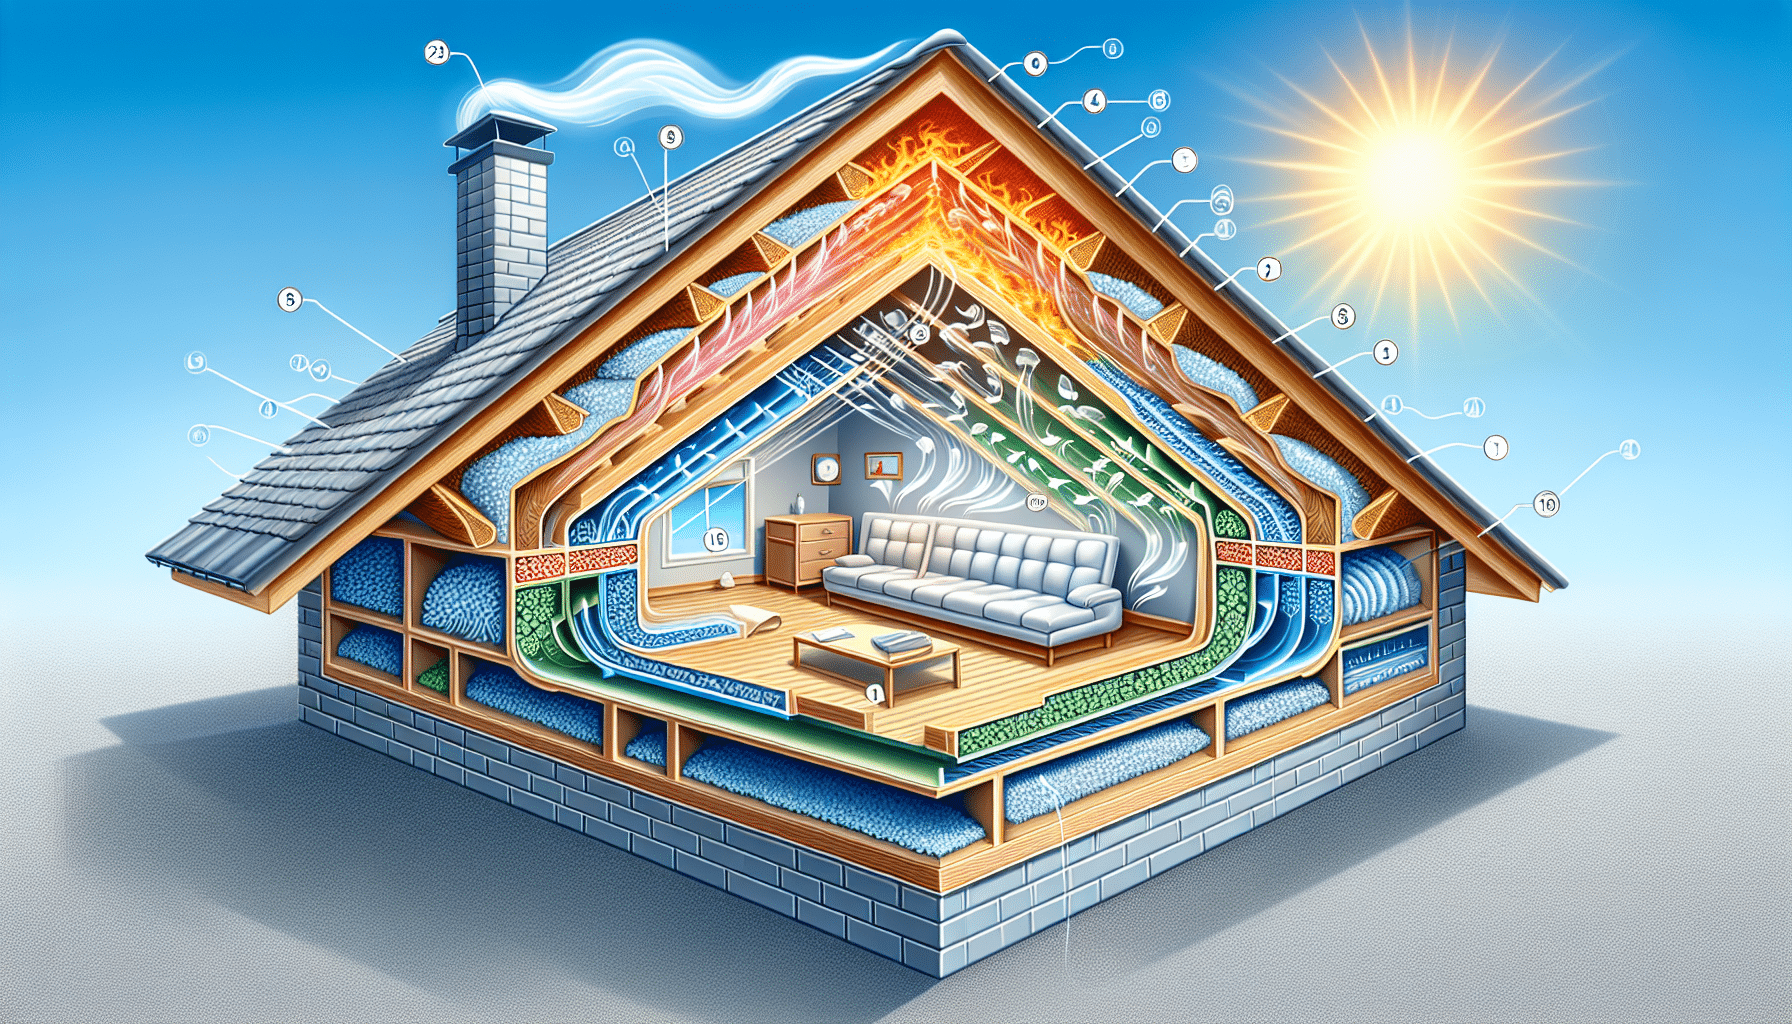 Proper attic ventilation and insulation for energy efficiency